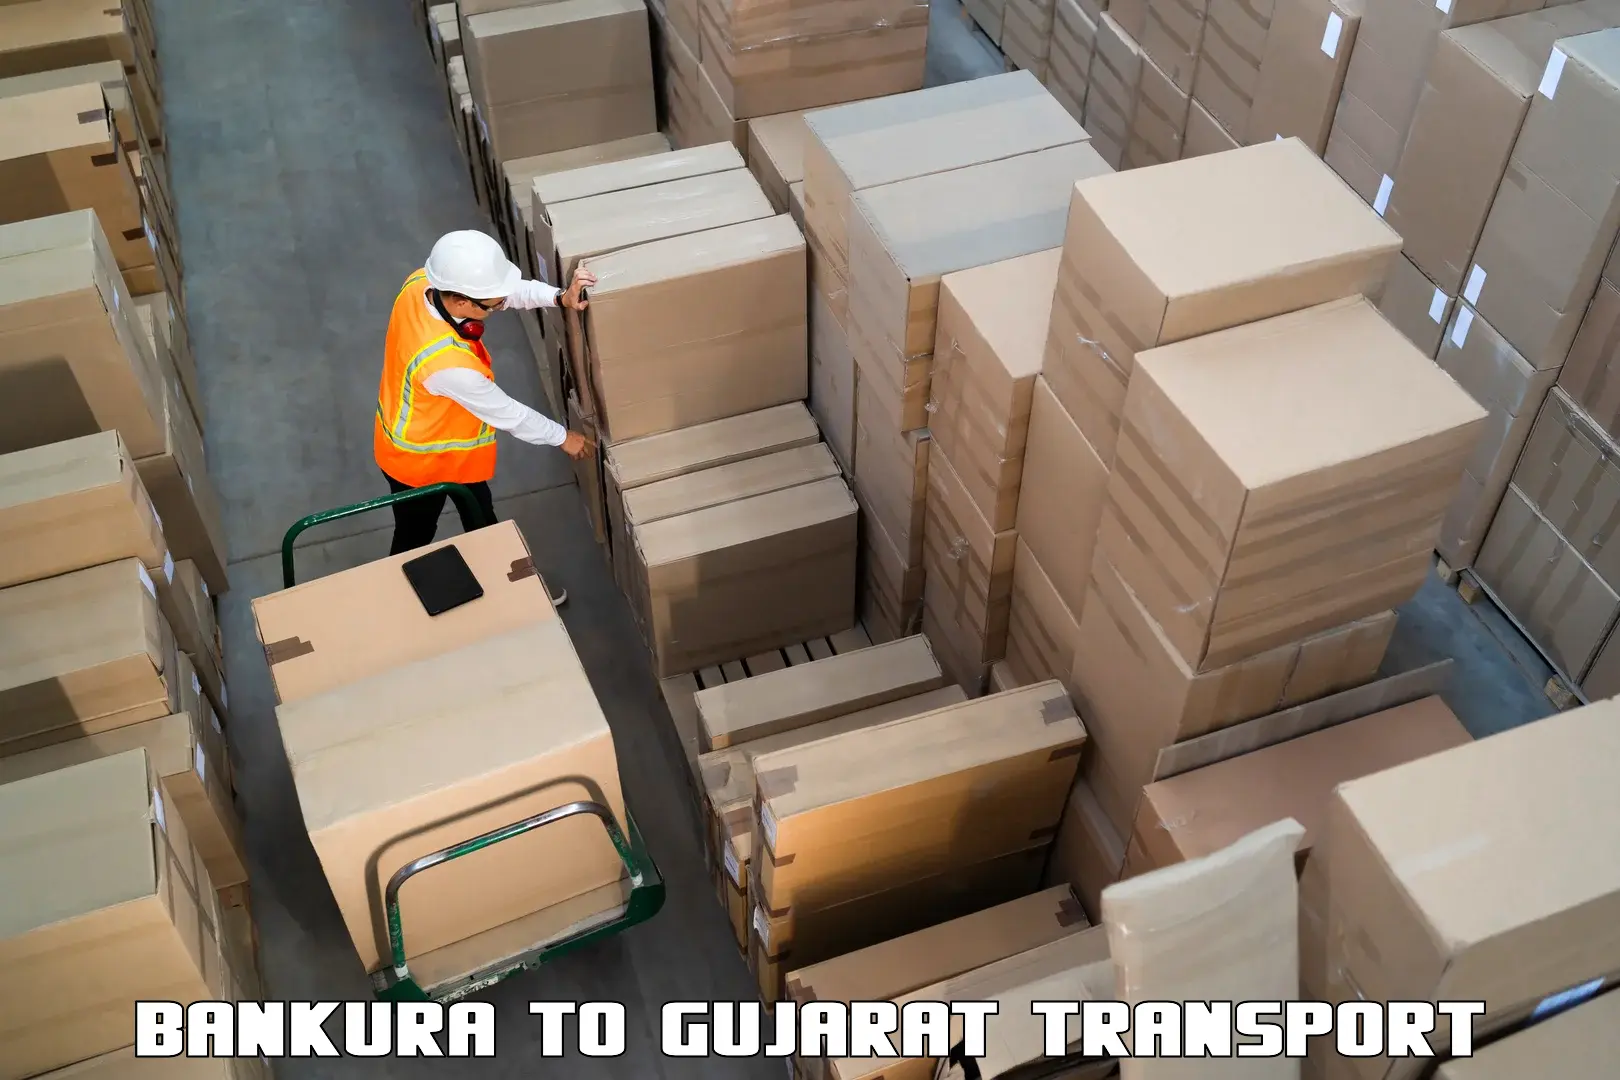 Transport bike from one state to another Bankura to Gujarat